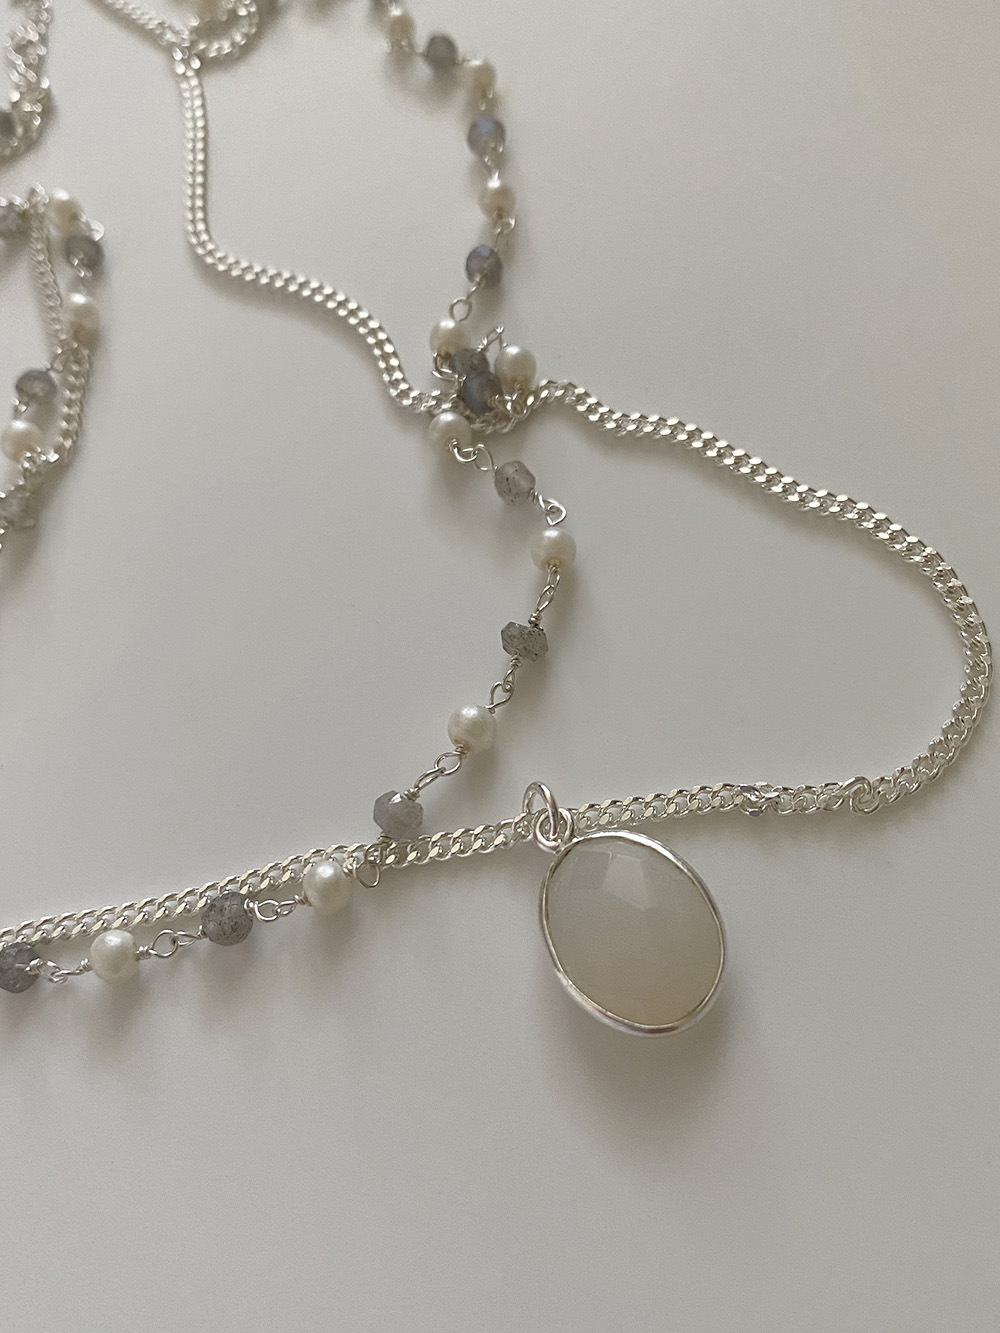 [92.5 silver] natural jemstone necklace